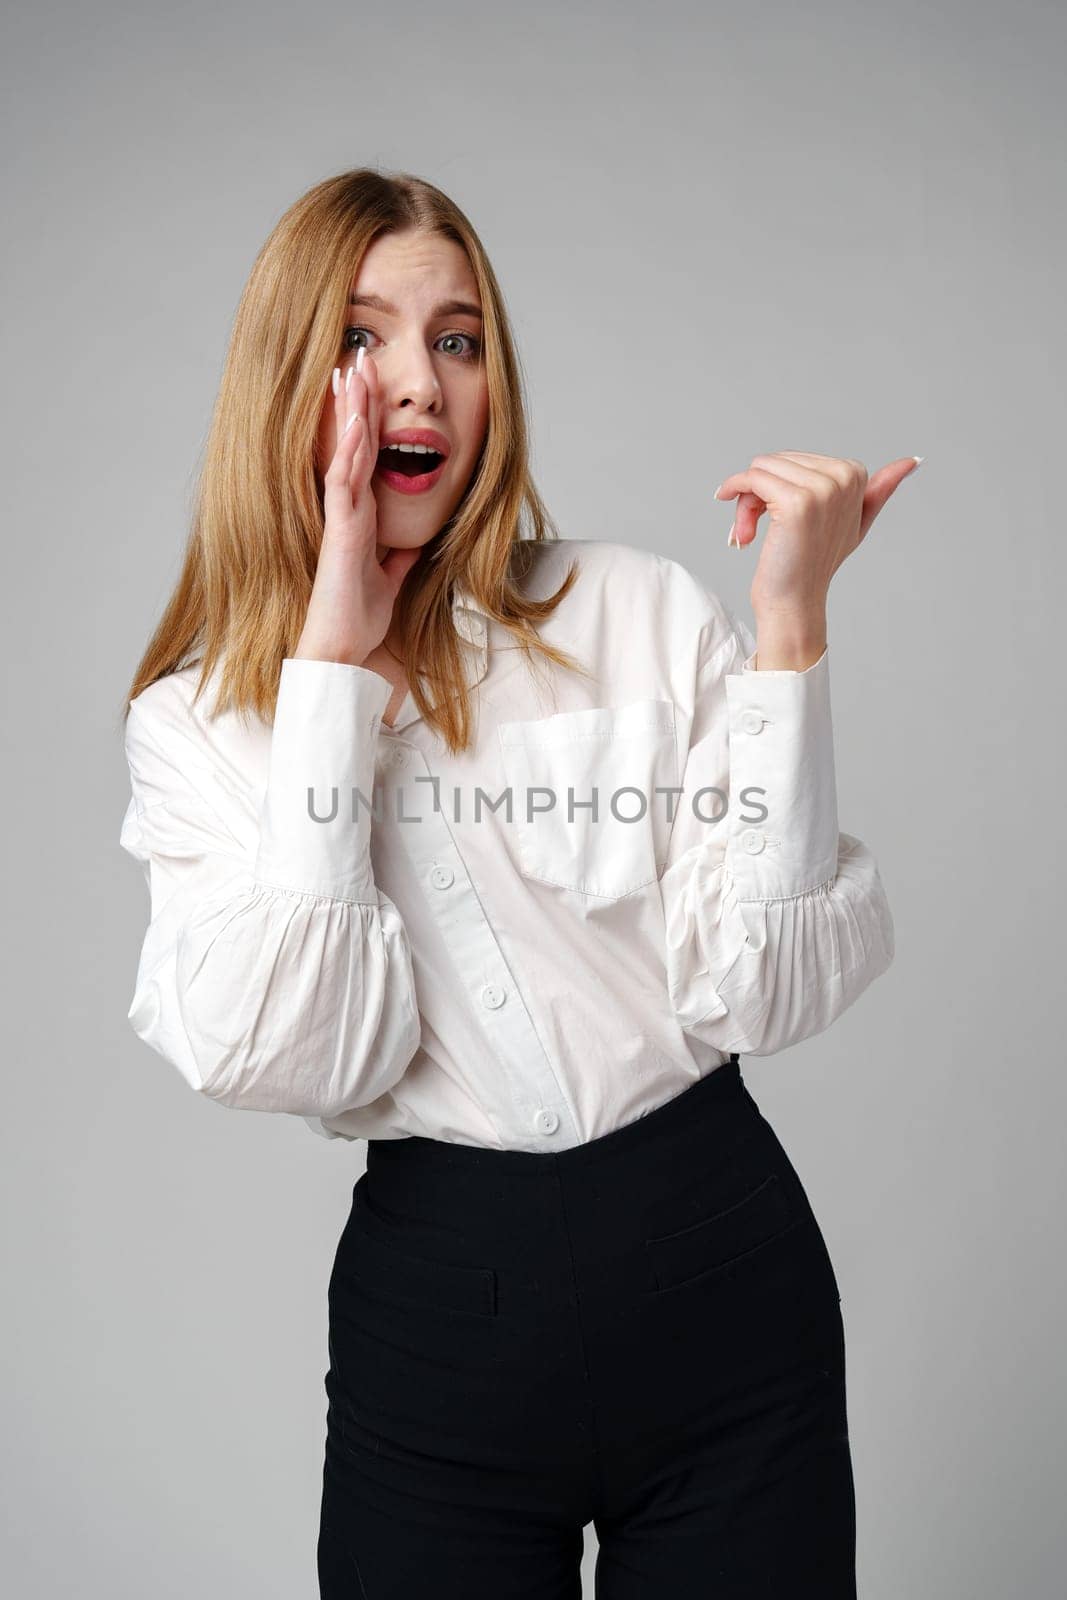 Young blonde woman in formal outfit pointing to the side against gray background in studio